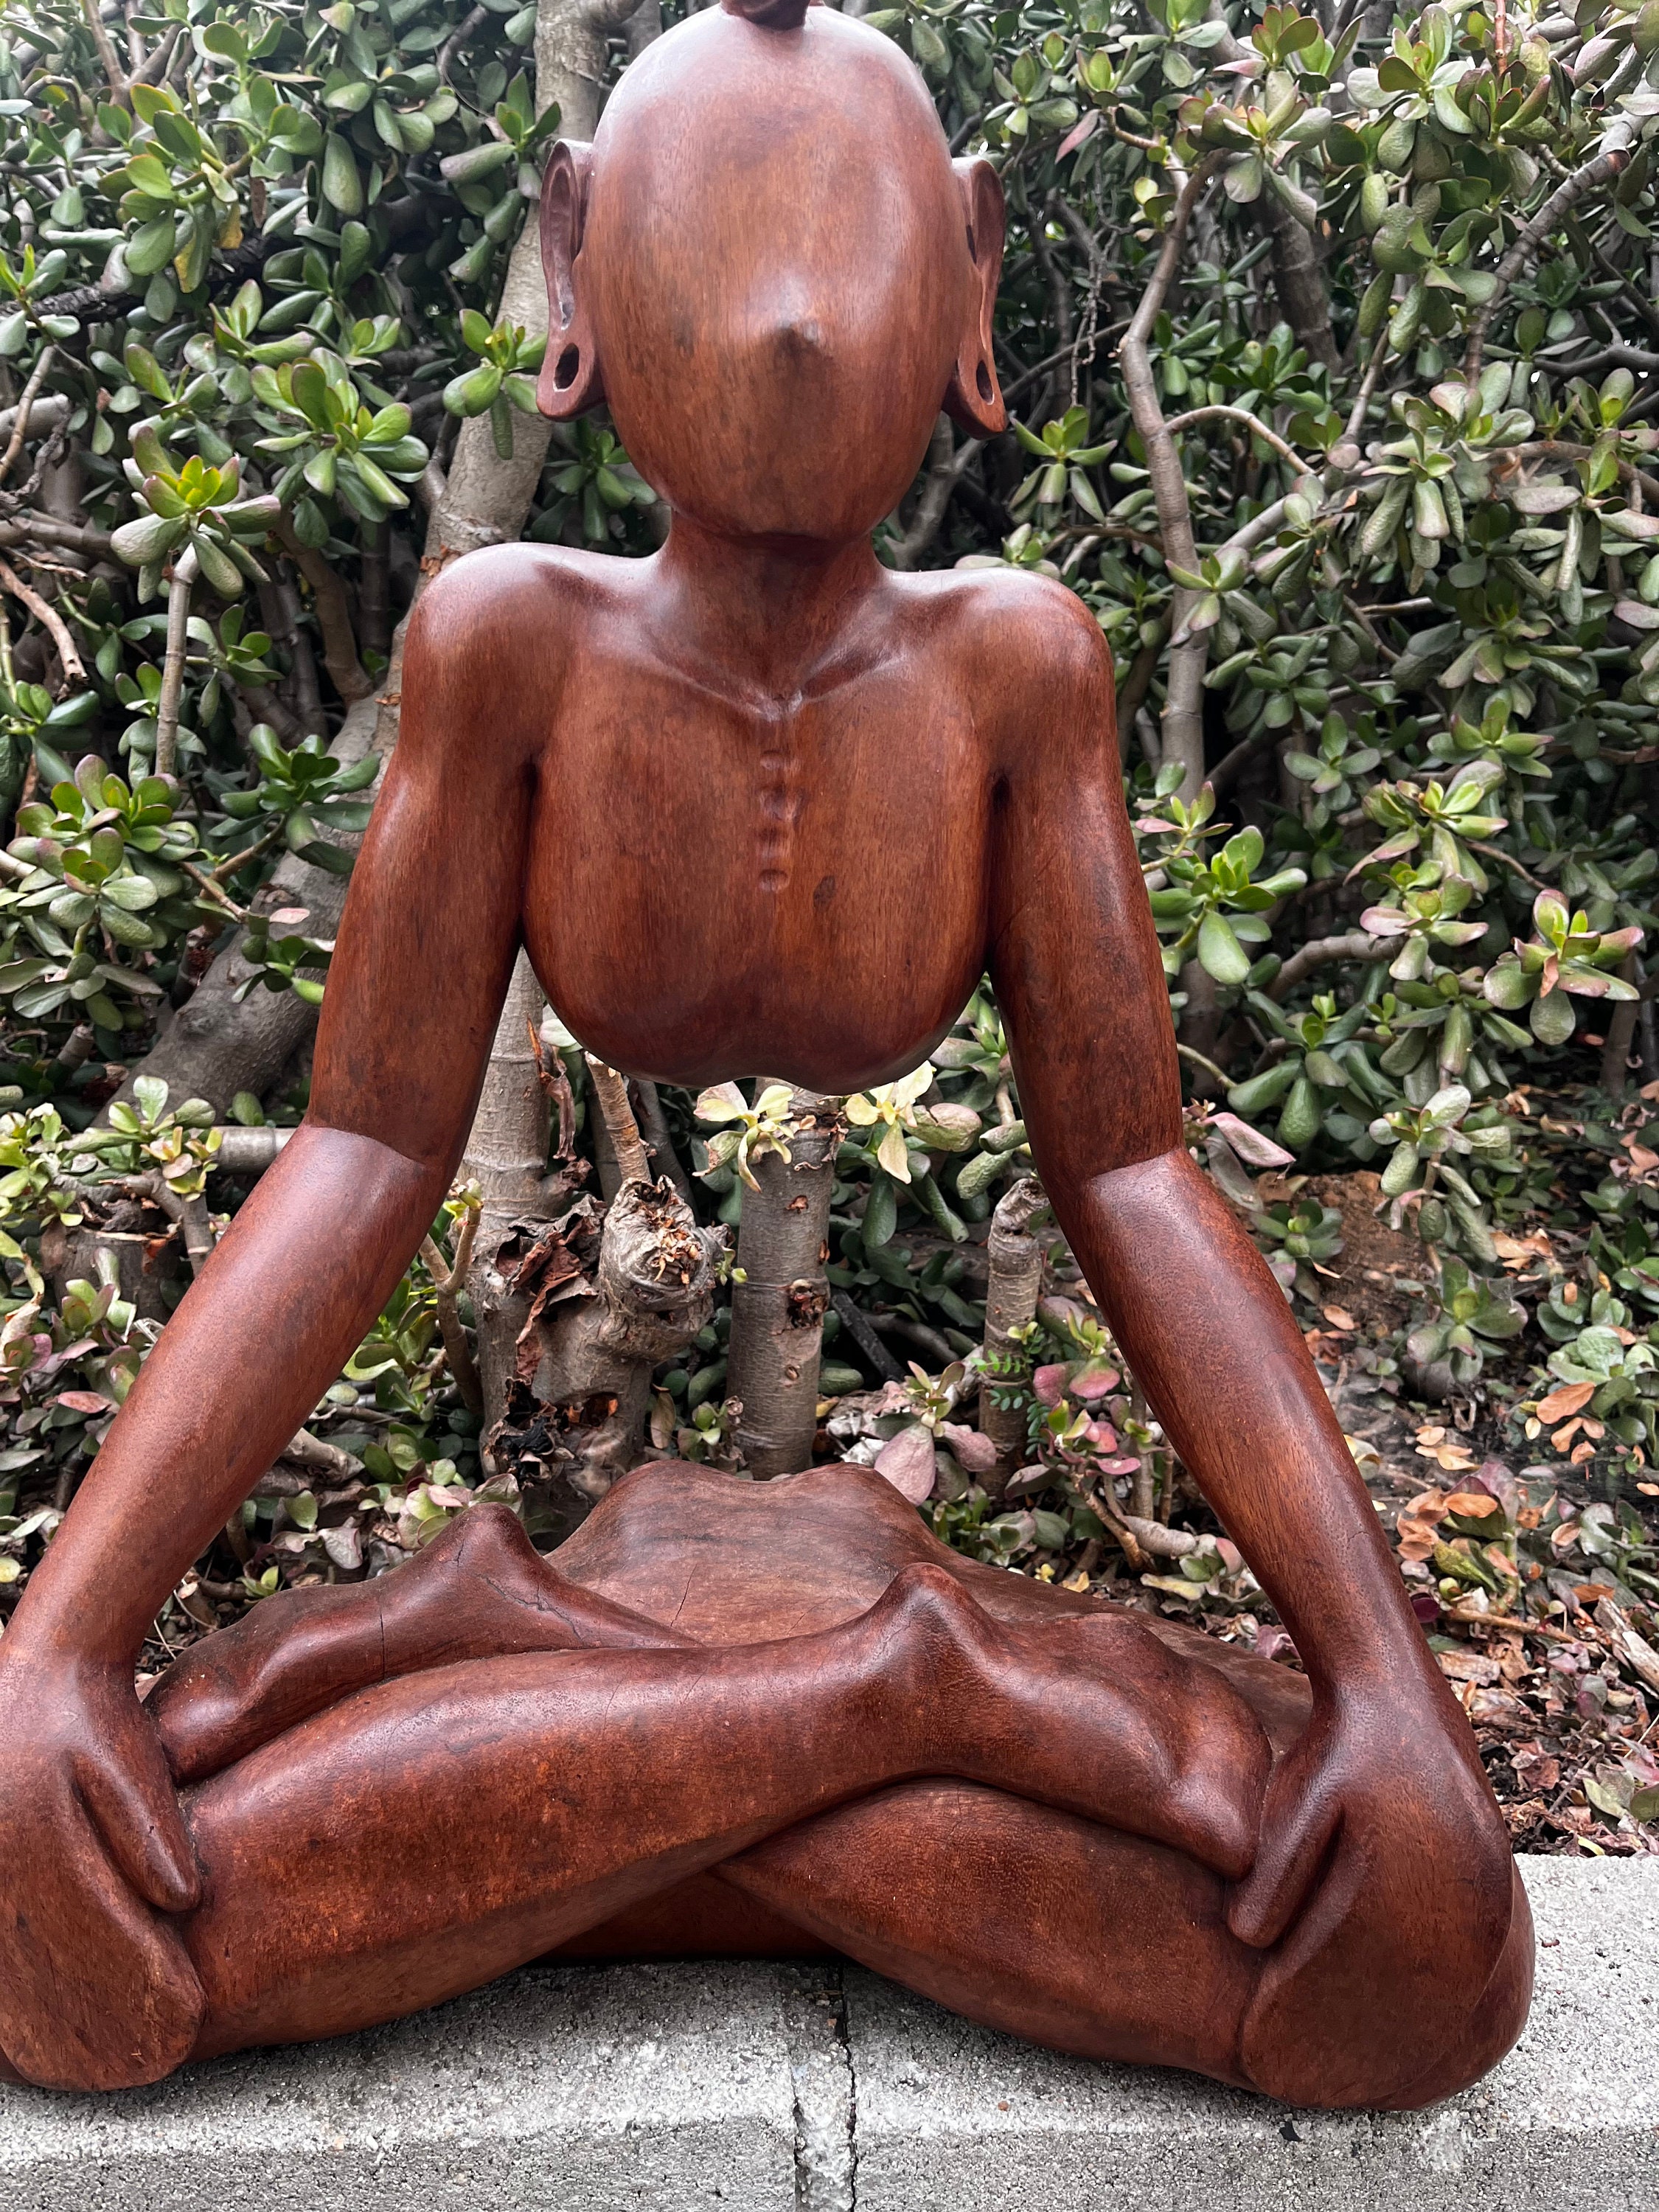 Buy Mahogany Wood Statue Online In India -  India